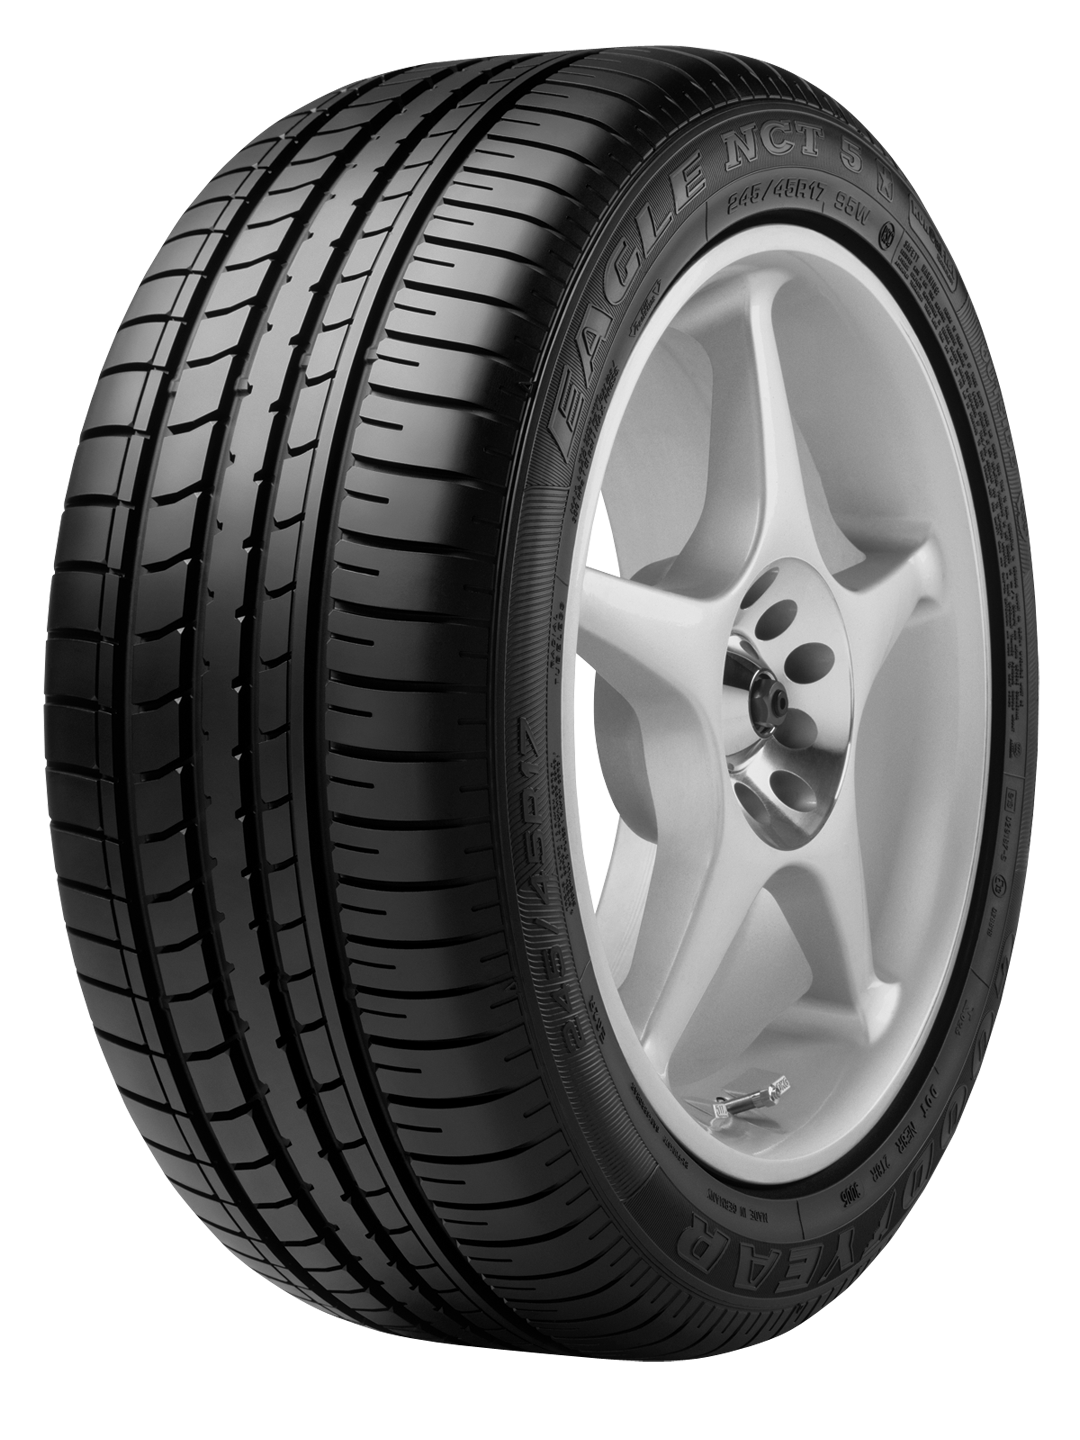 Travel Fold Sanction GOODYEAR EAGLE NCT 5 EMT 205 / 55 R 16 - Appalacian Tire Products & Service  Appalacian Tire Products & Service